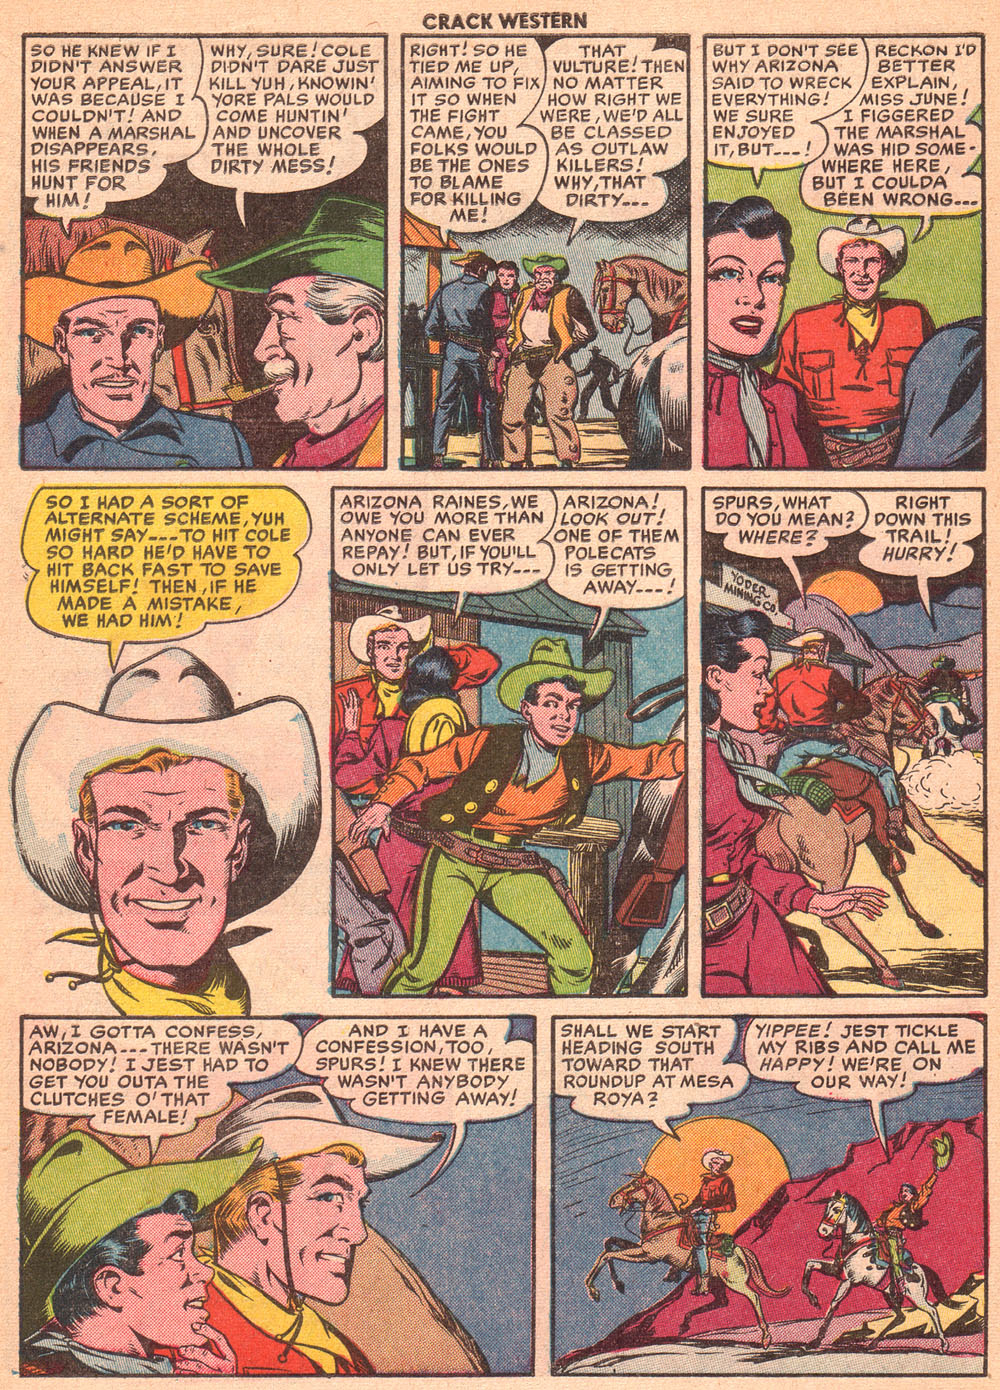 Read online Crack Western comic -  Issue #72 - 14